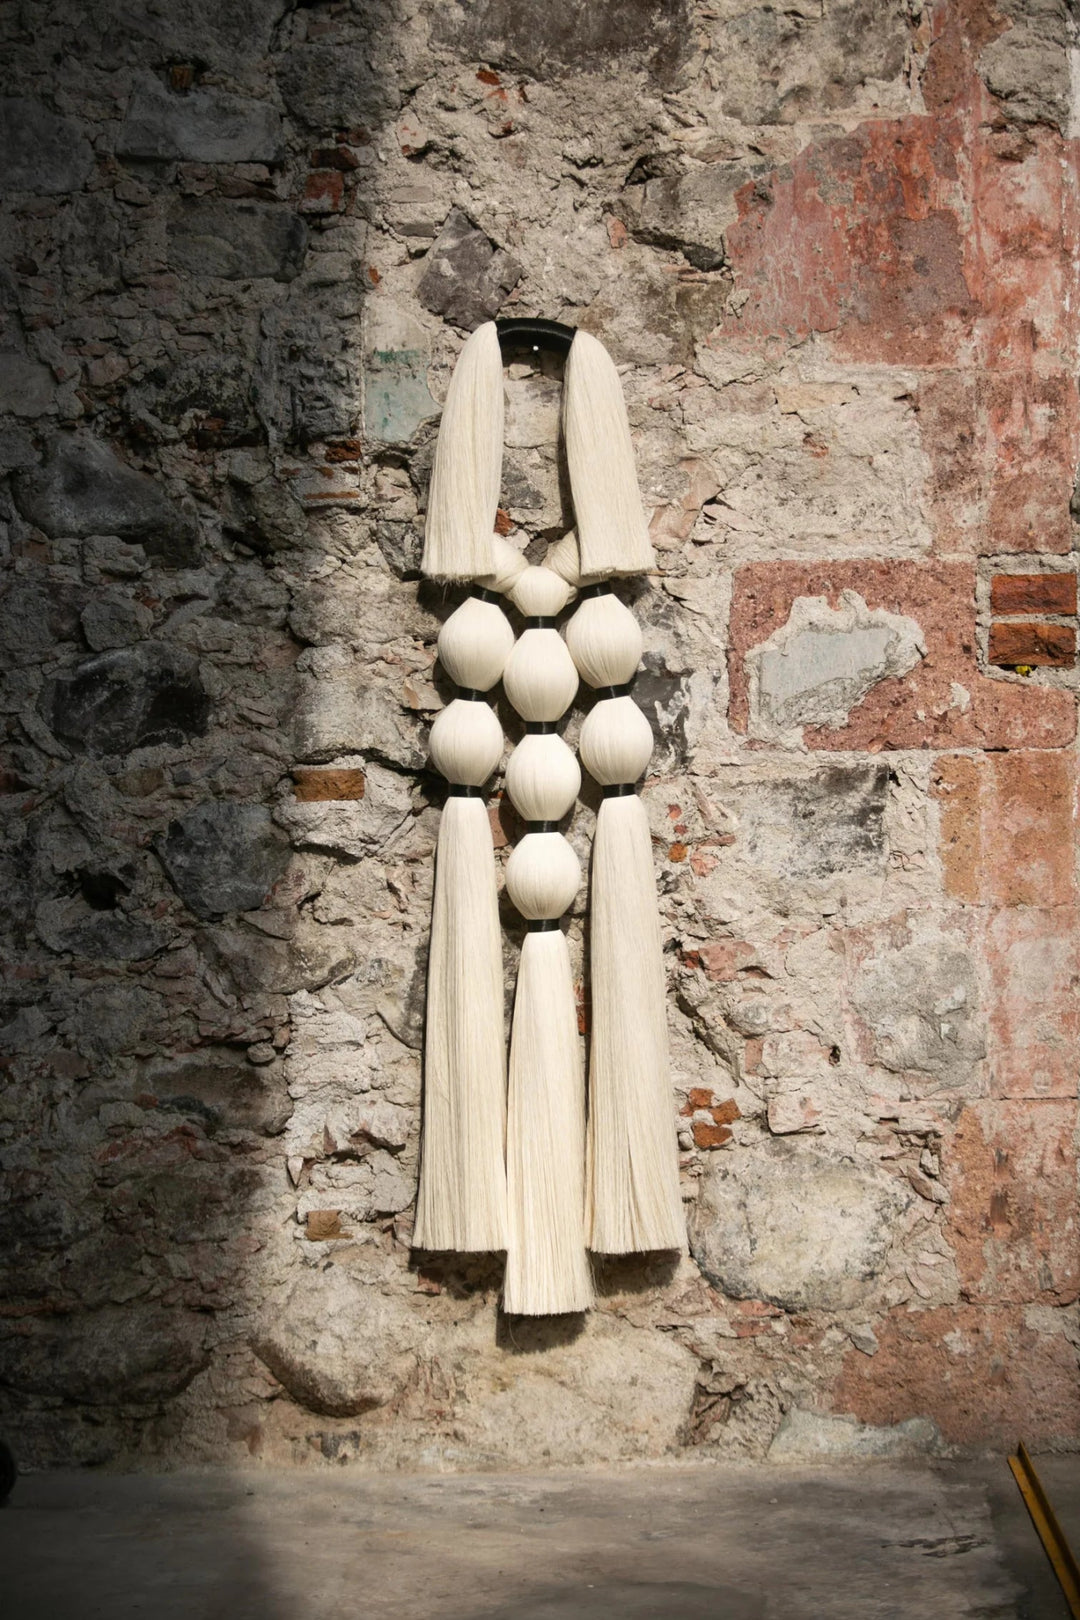 Siete Brujas Wall Hanger by Caralarga at White Label Project